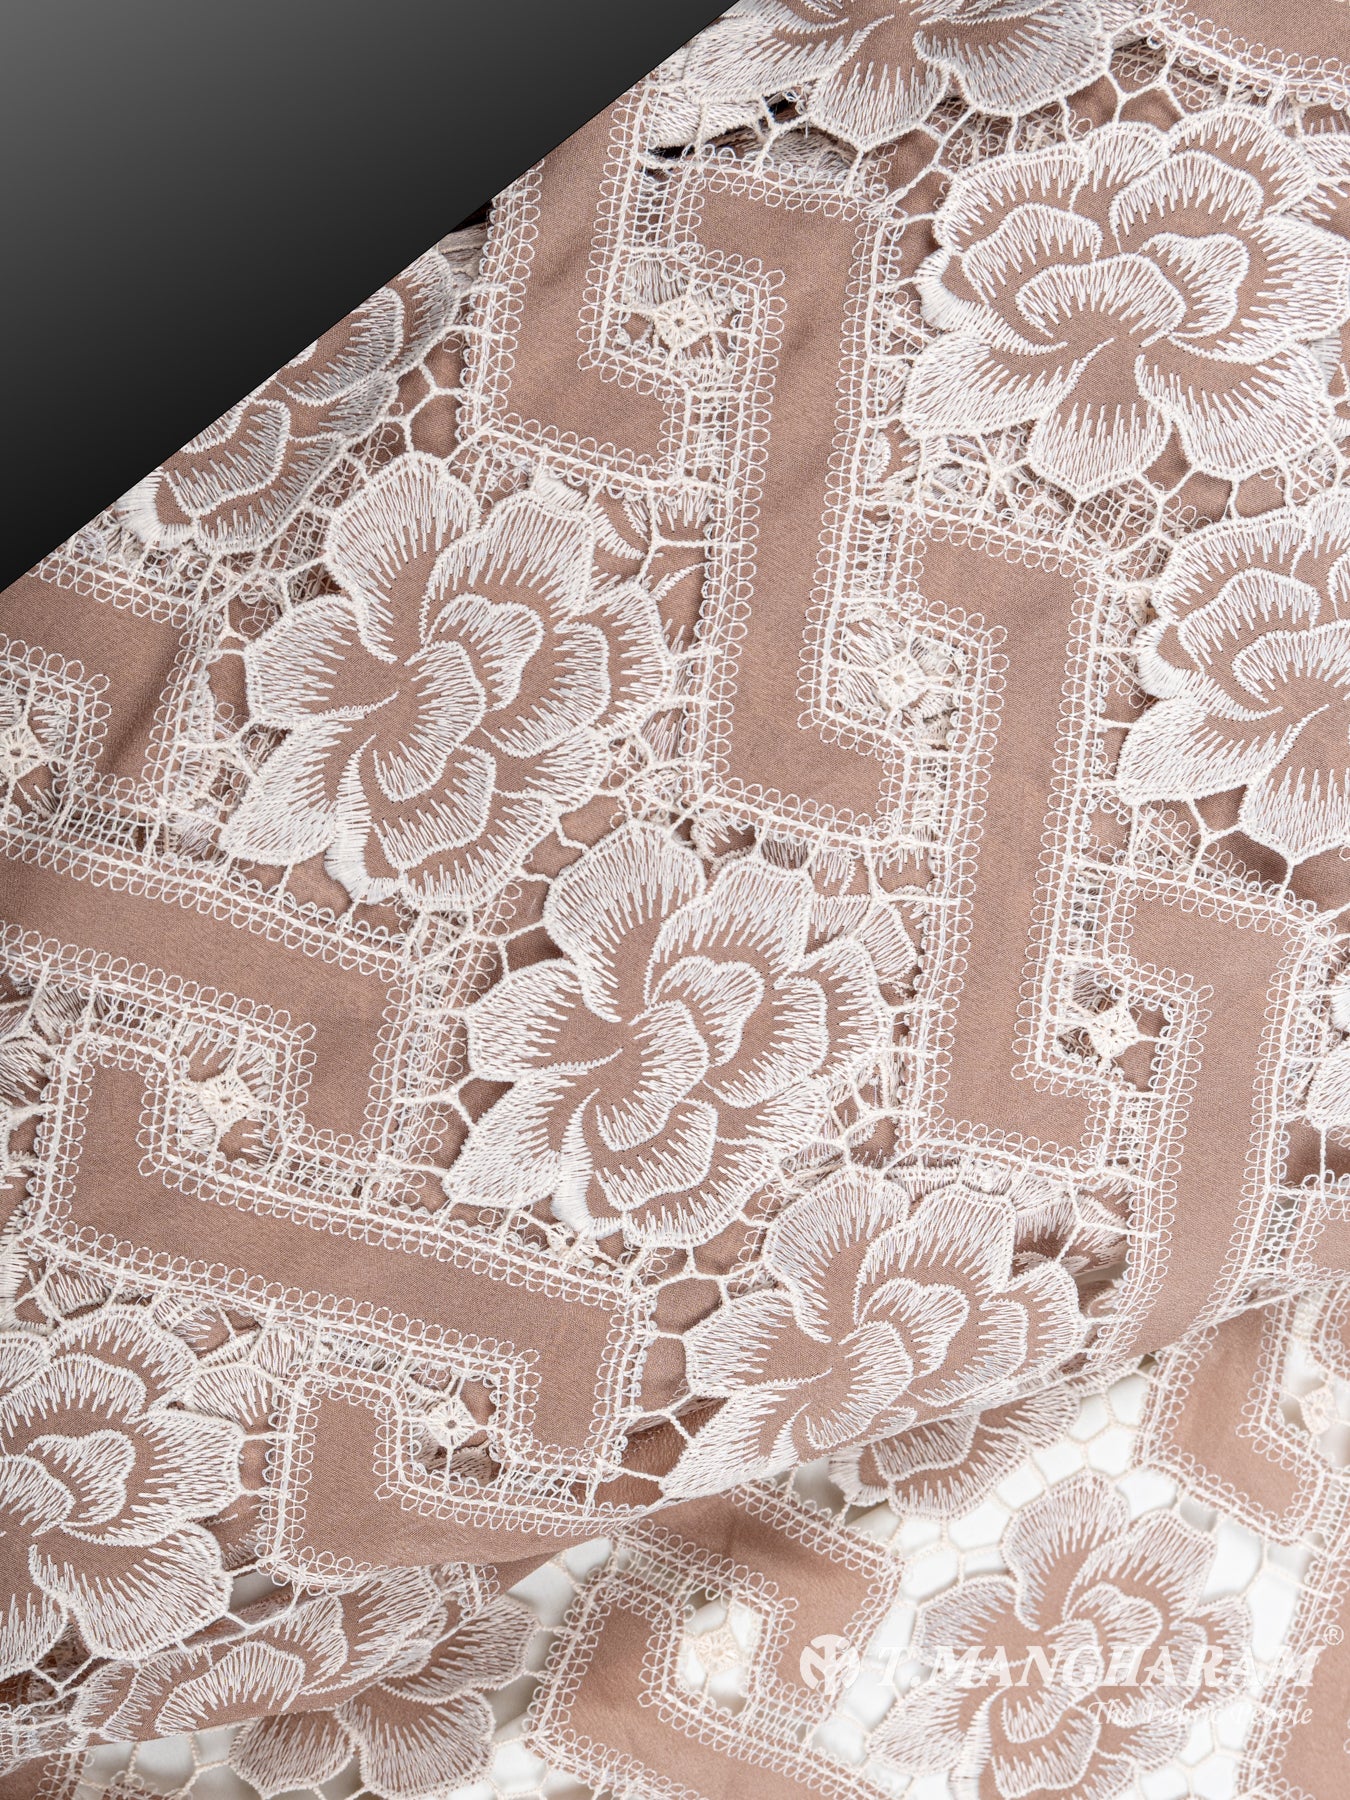 Peach Cotton Embroidery Fabric - EC6394 view-2